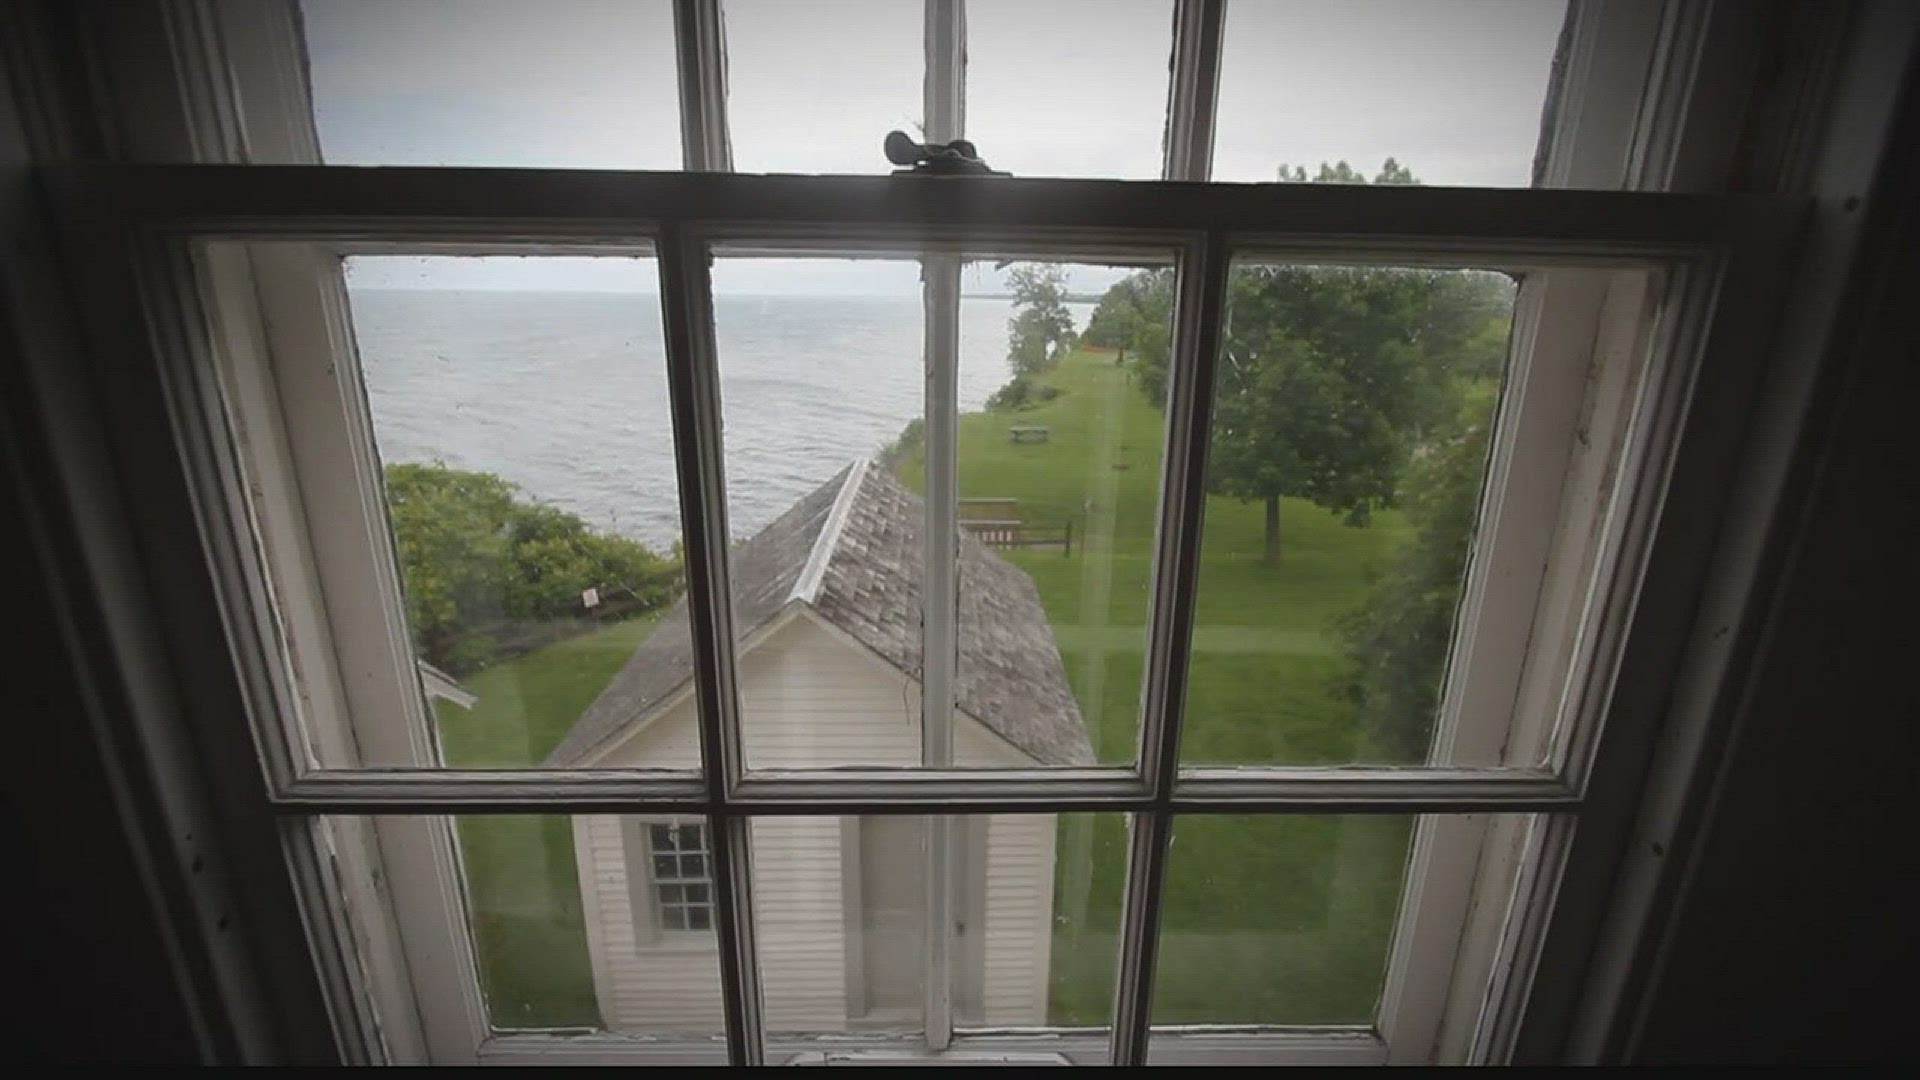 Erica Brecher takes us to one of the gems that looks over Lake Ontario